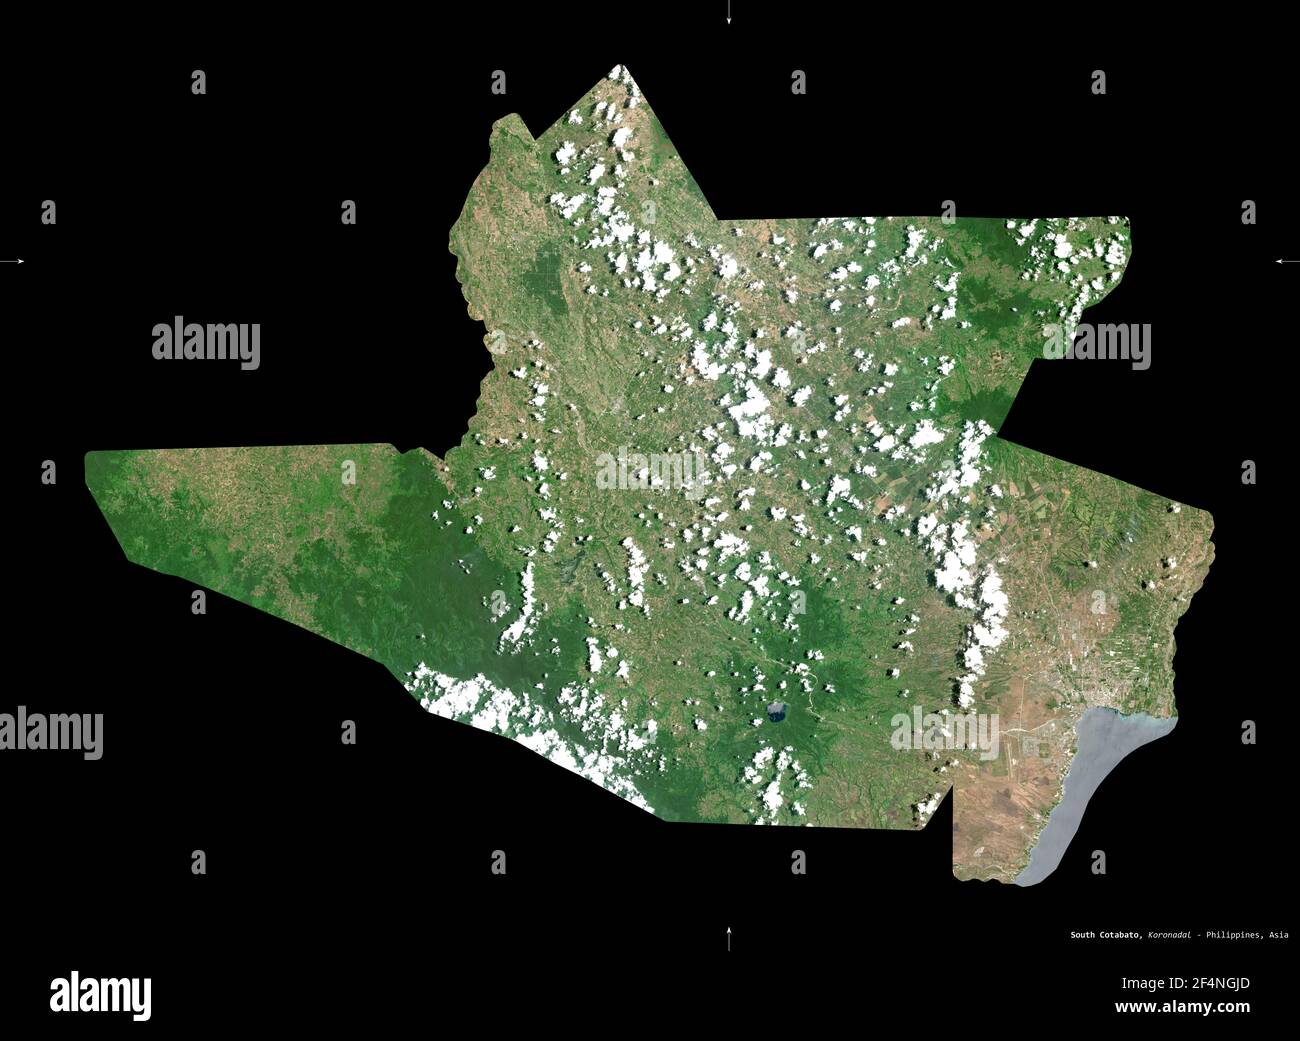 South Cotabato, province of Philippines. Sentinel-2 satellite imagery. Shape isolated on black. Description, location of the capital. Contains modifie Stock Photo